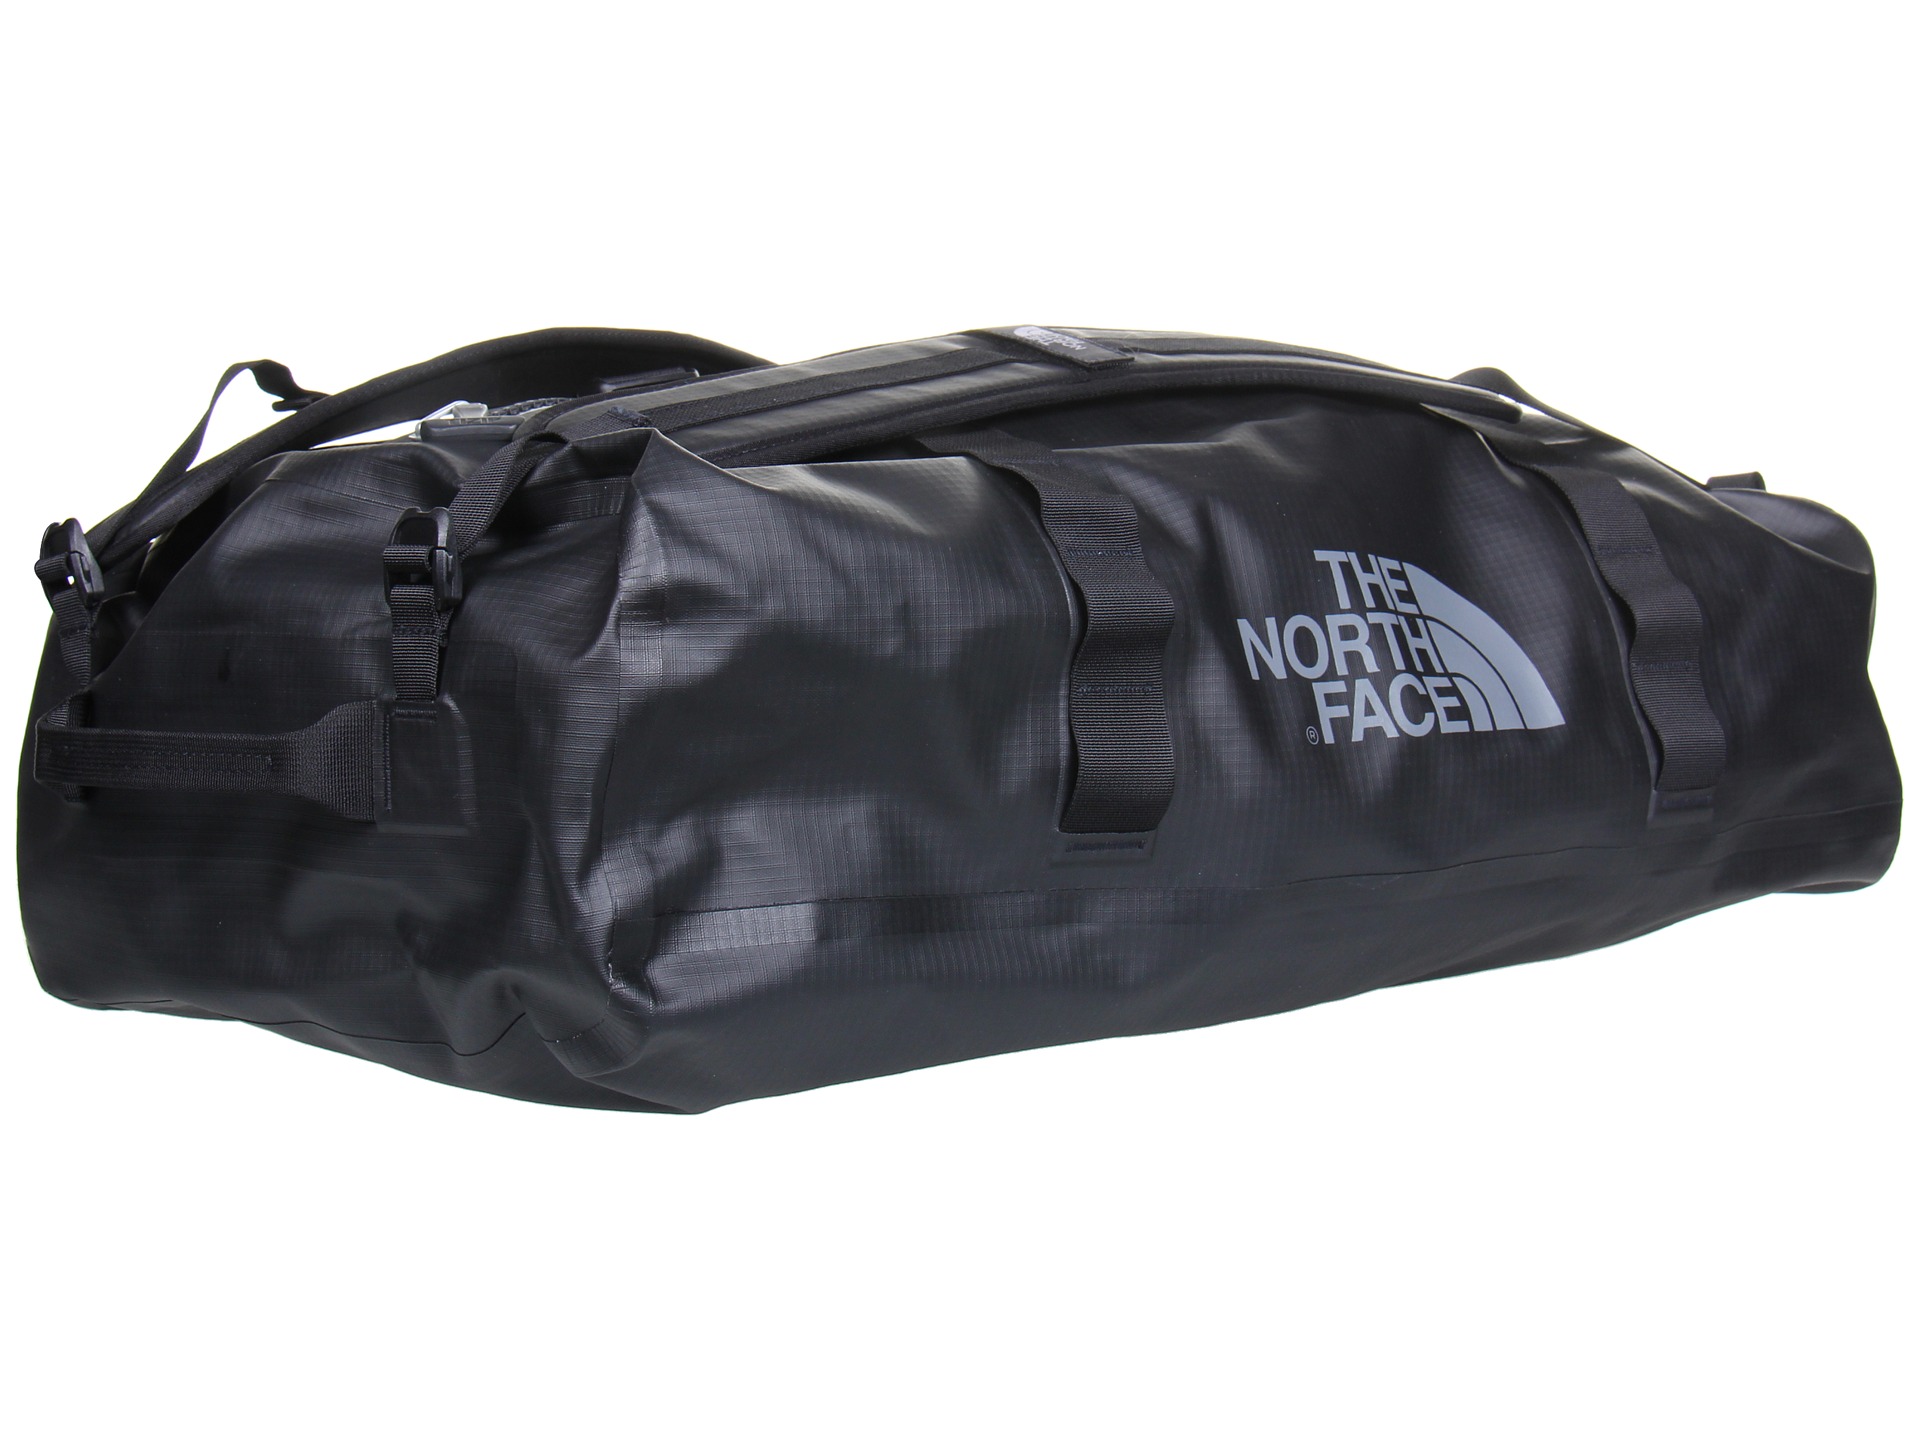 the north face waterproof duffel large $ 259 00 obey